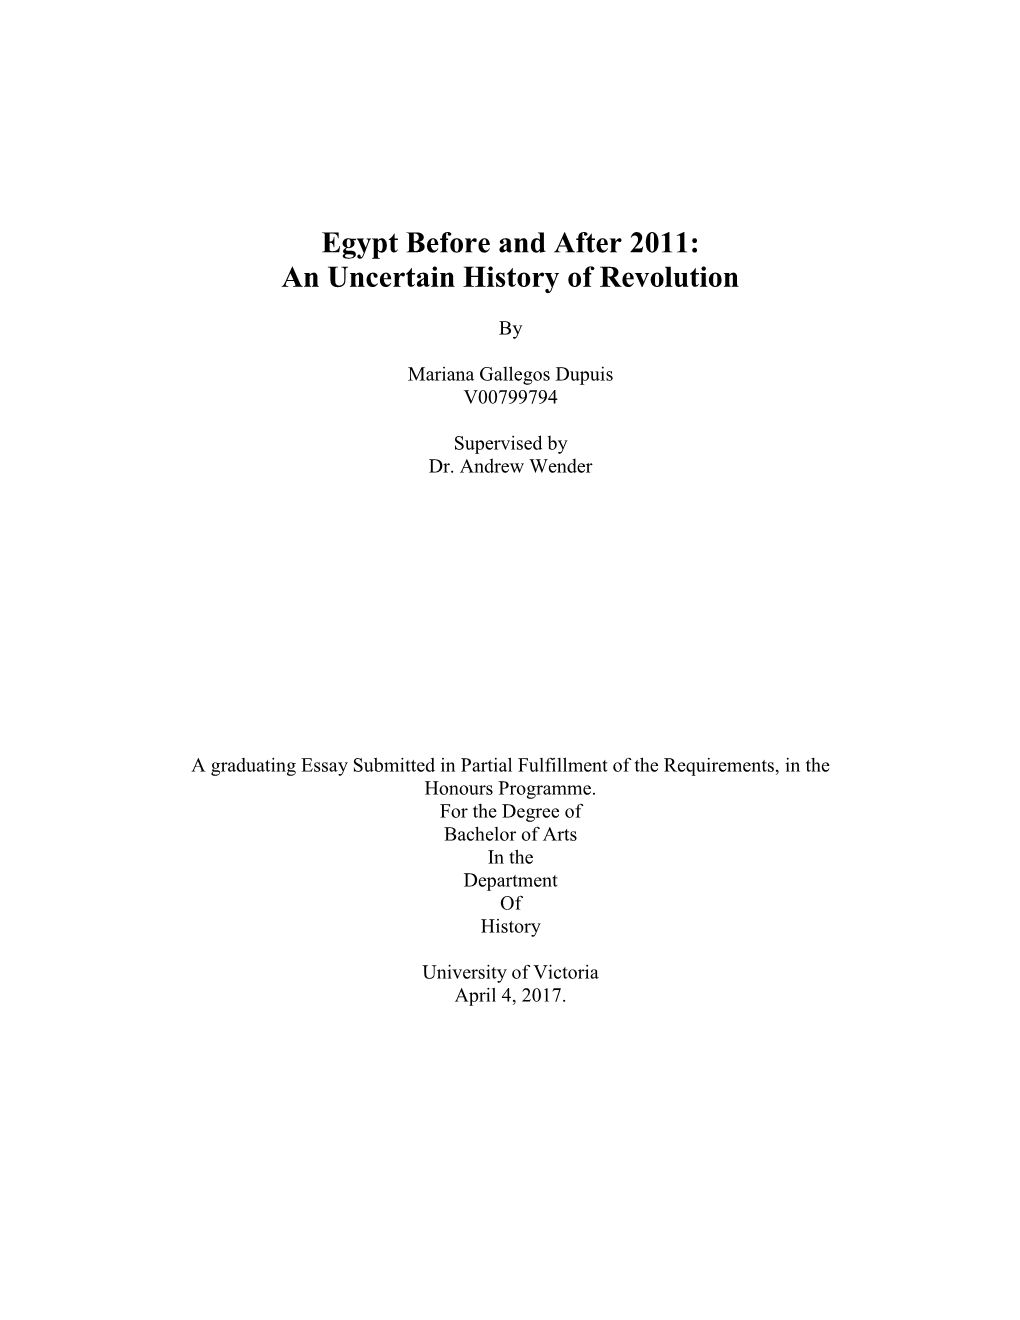 Egypt Before and After 2011: an Uncertain History of Revolution